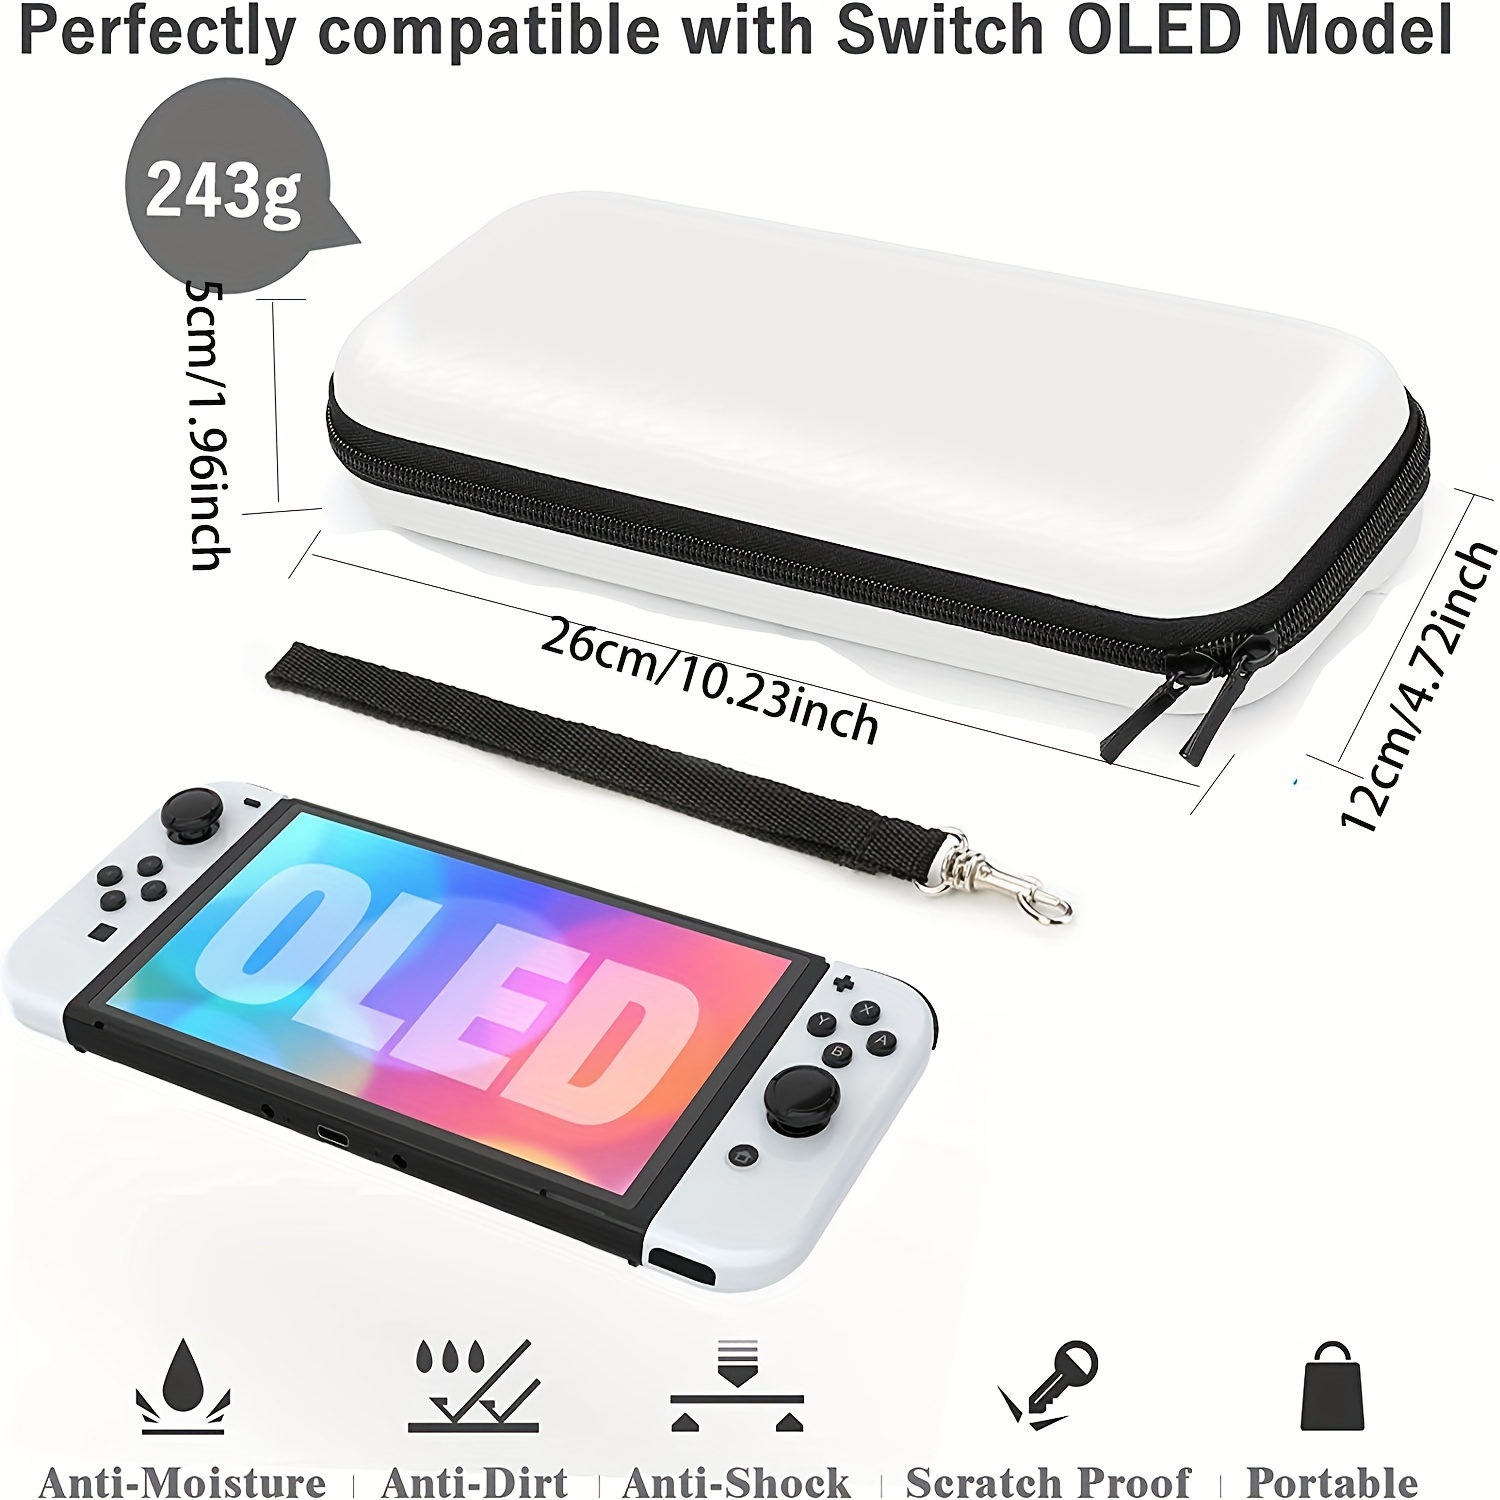 Switch Case for Nintendo Switch and Switch OLED Model, Portable